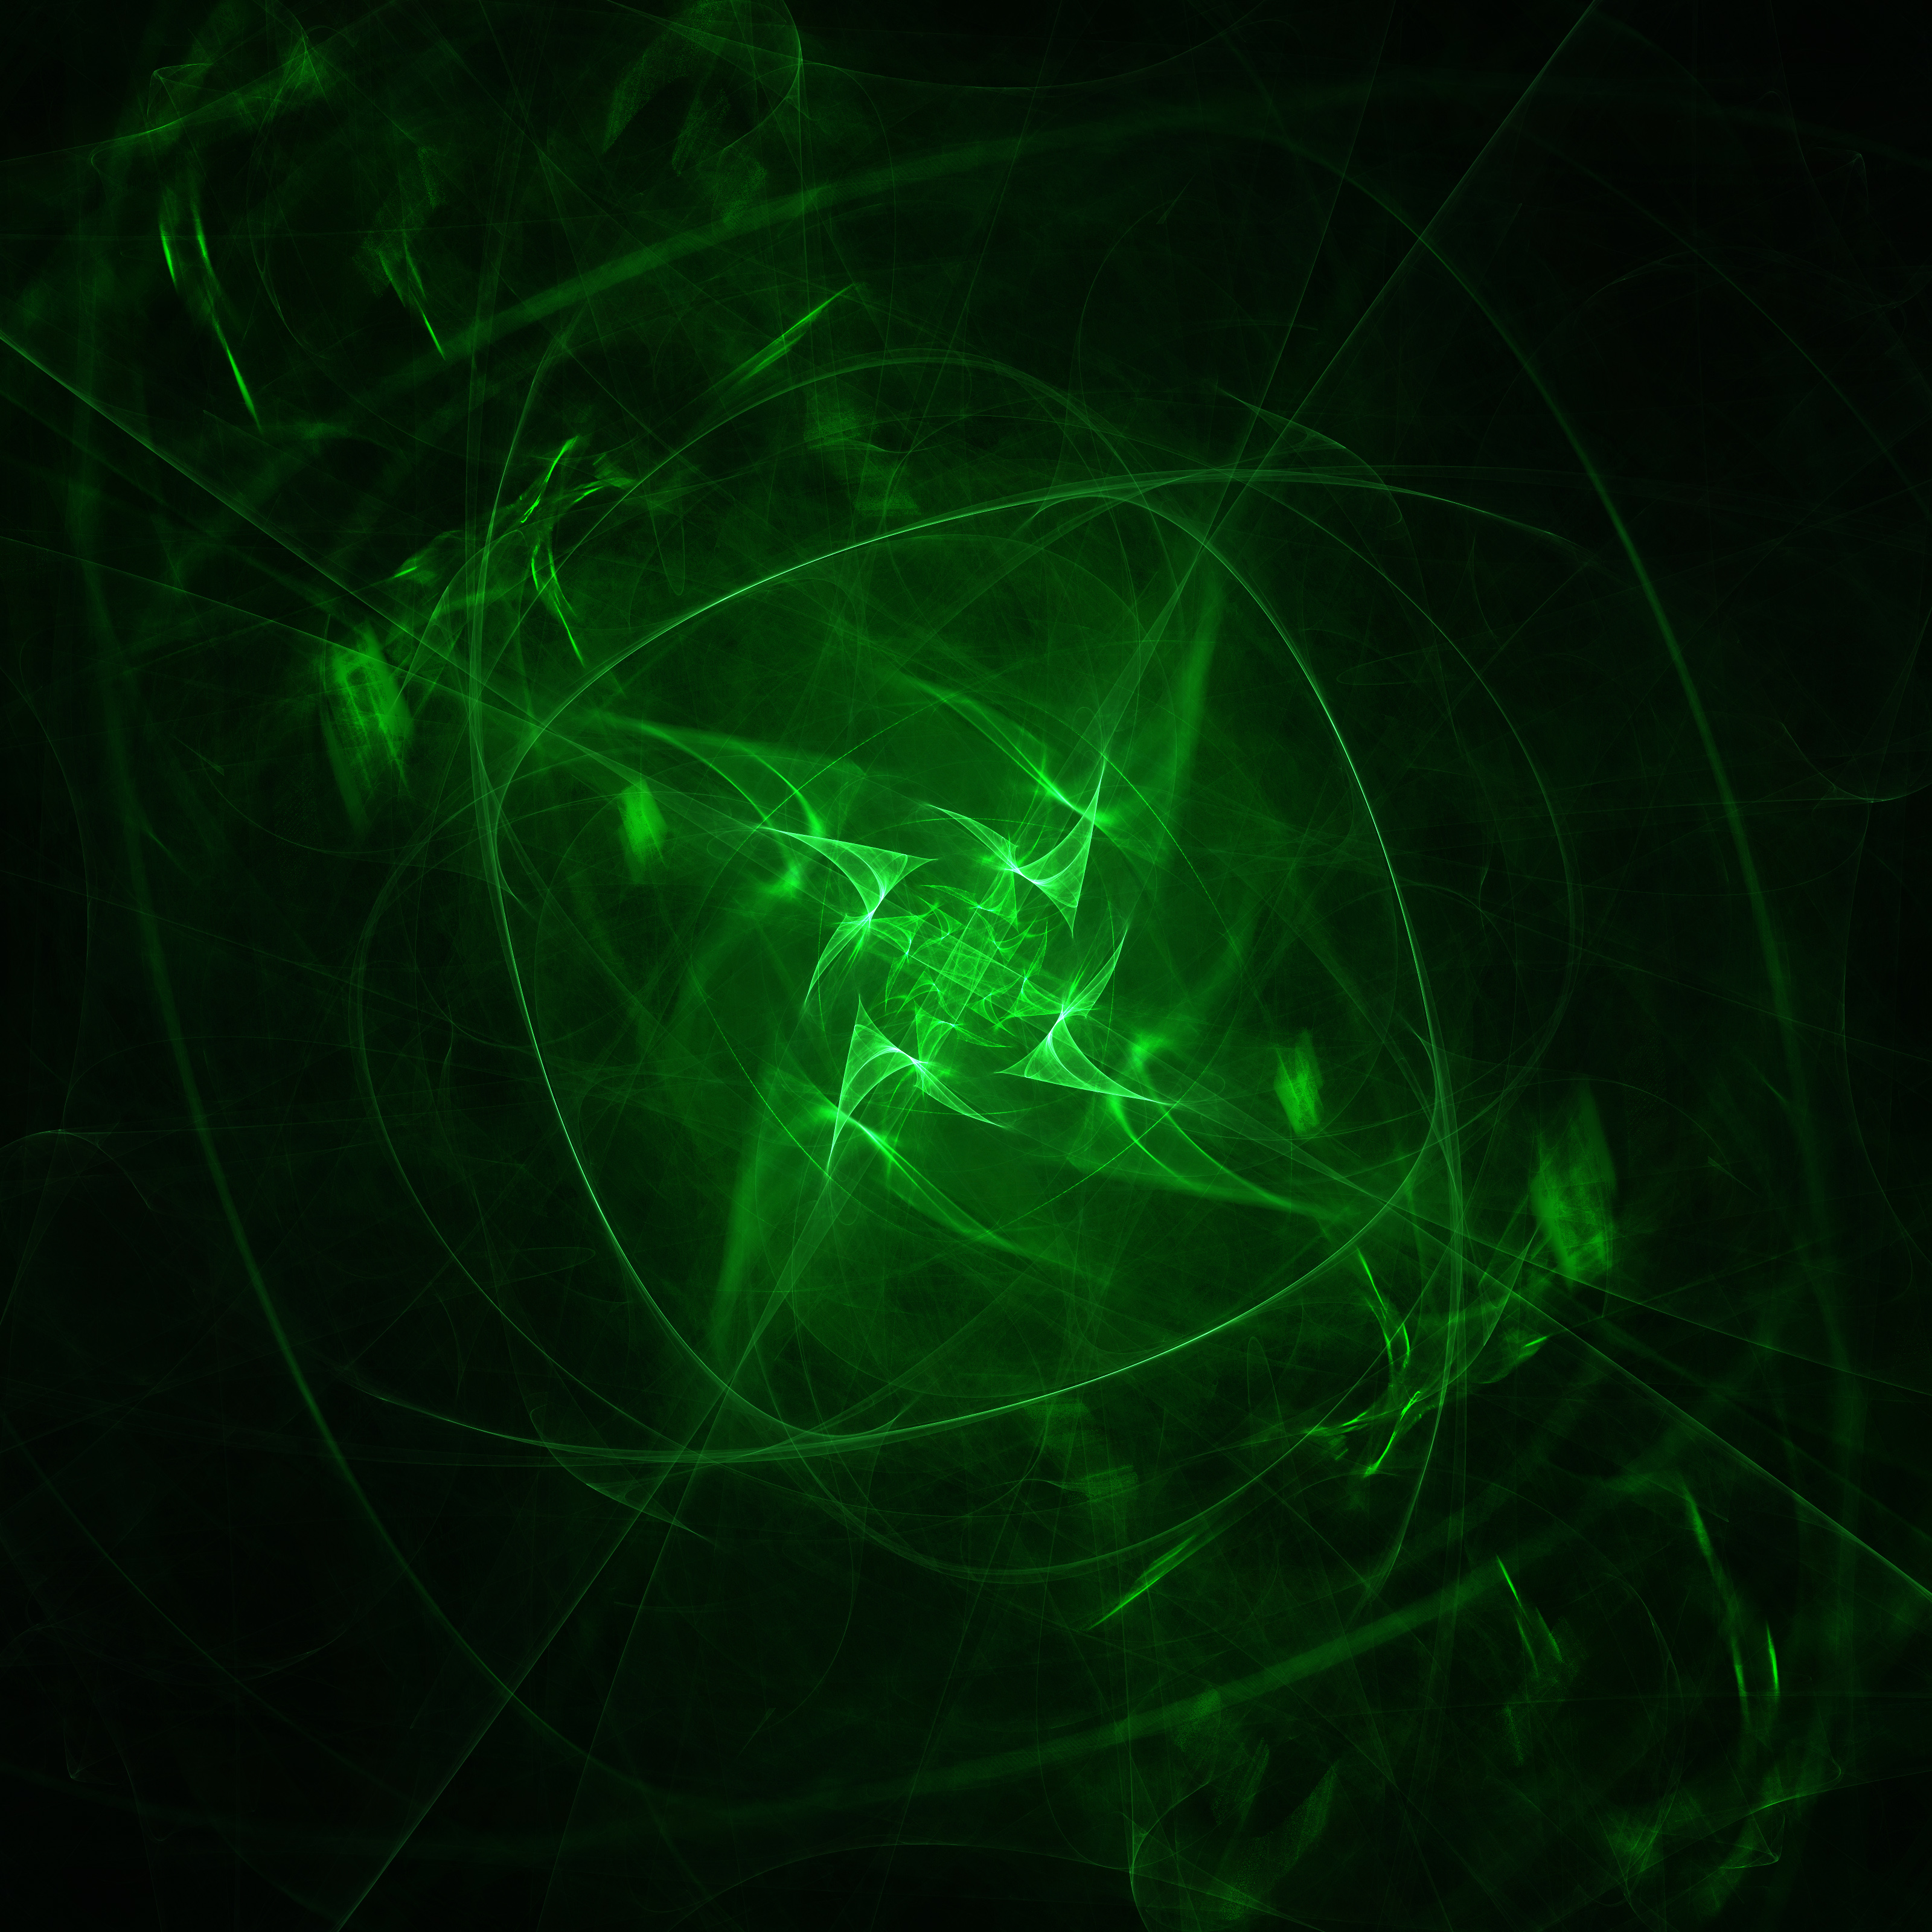 Inside of the Emerald, Abstract, Cosmos, Dark, Emerald, HQ Photo